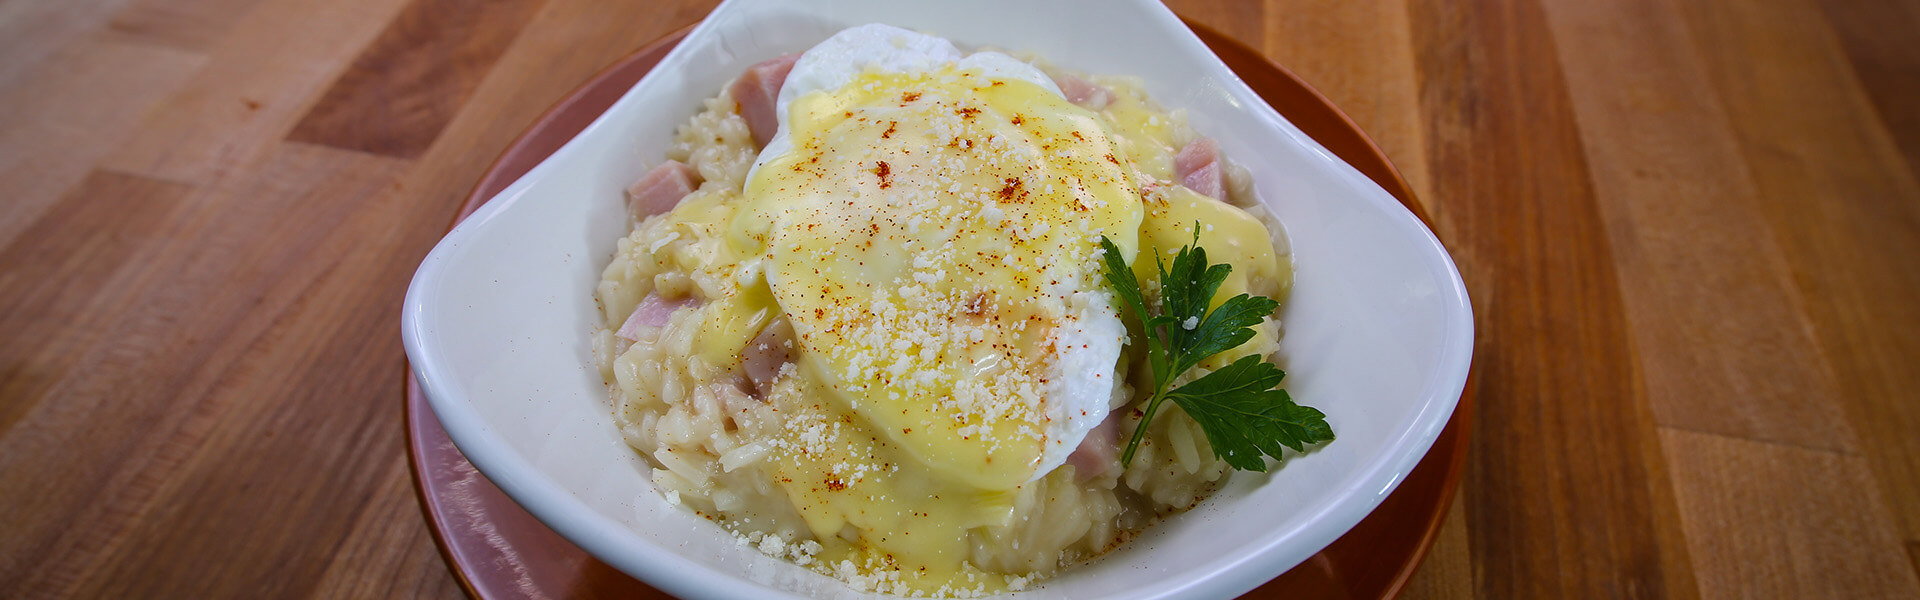 Eggs Benedict Risotto with Easy Hollandaise